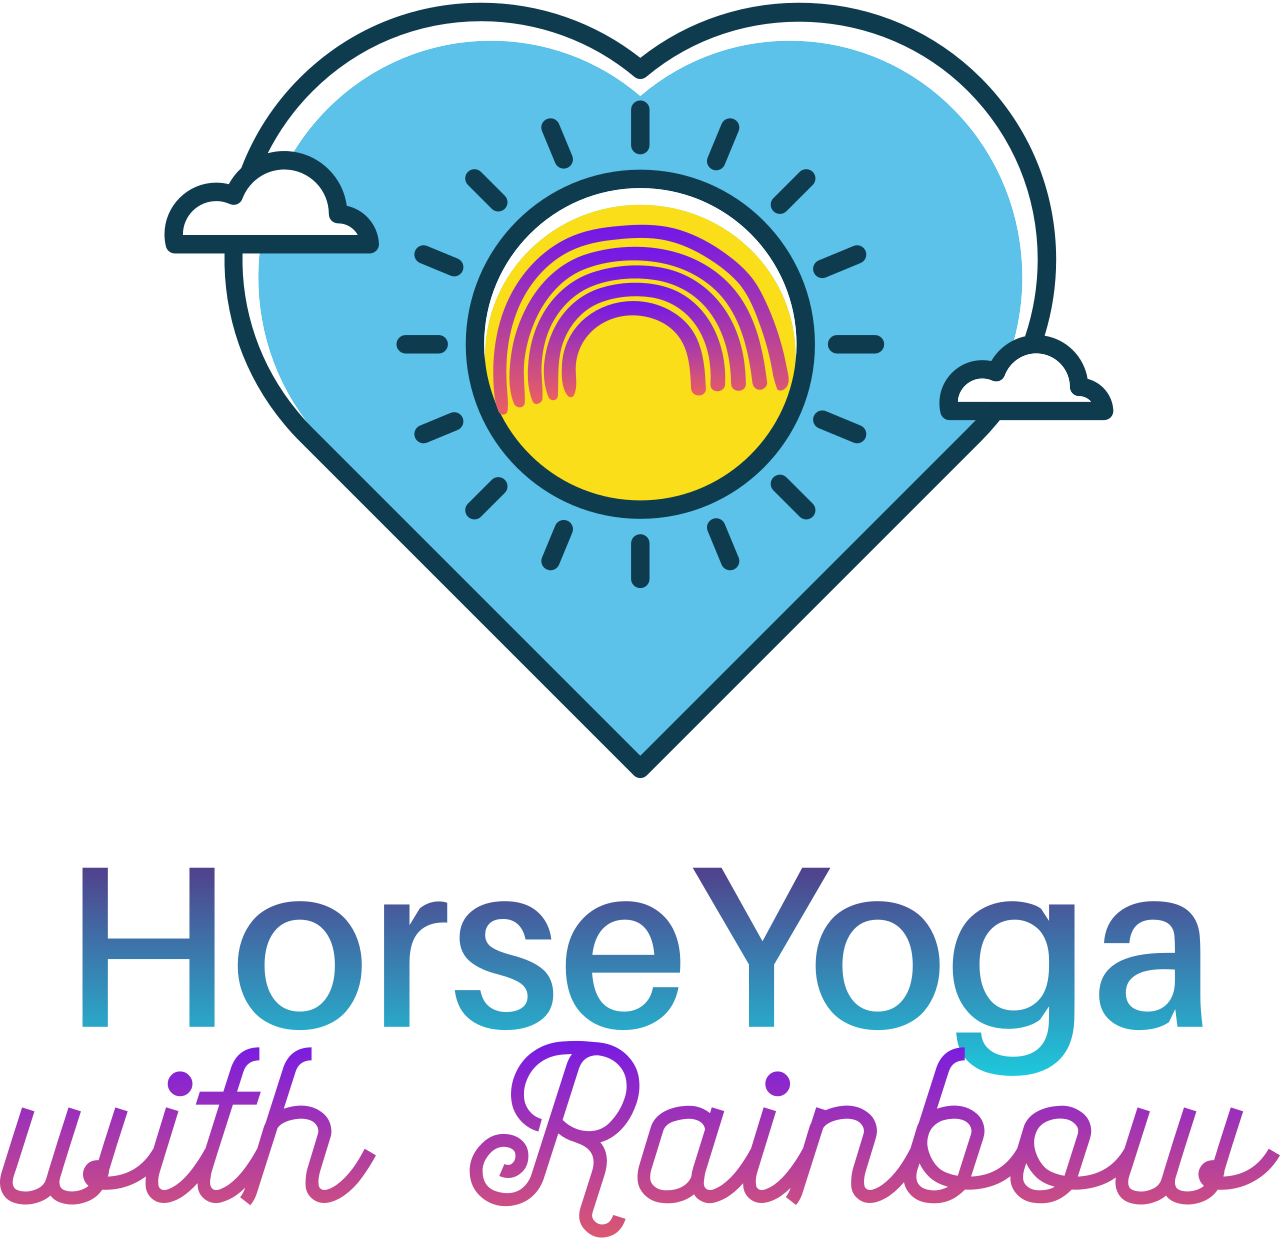 HorseYoga's web page